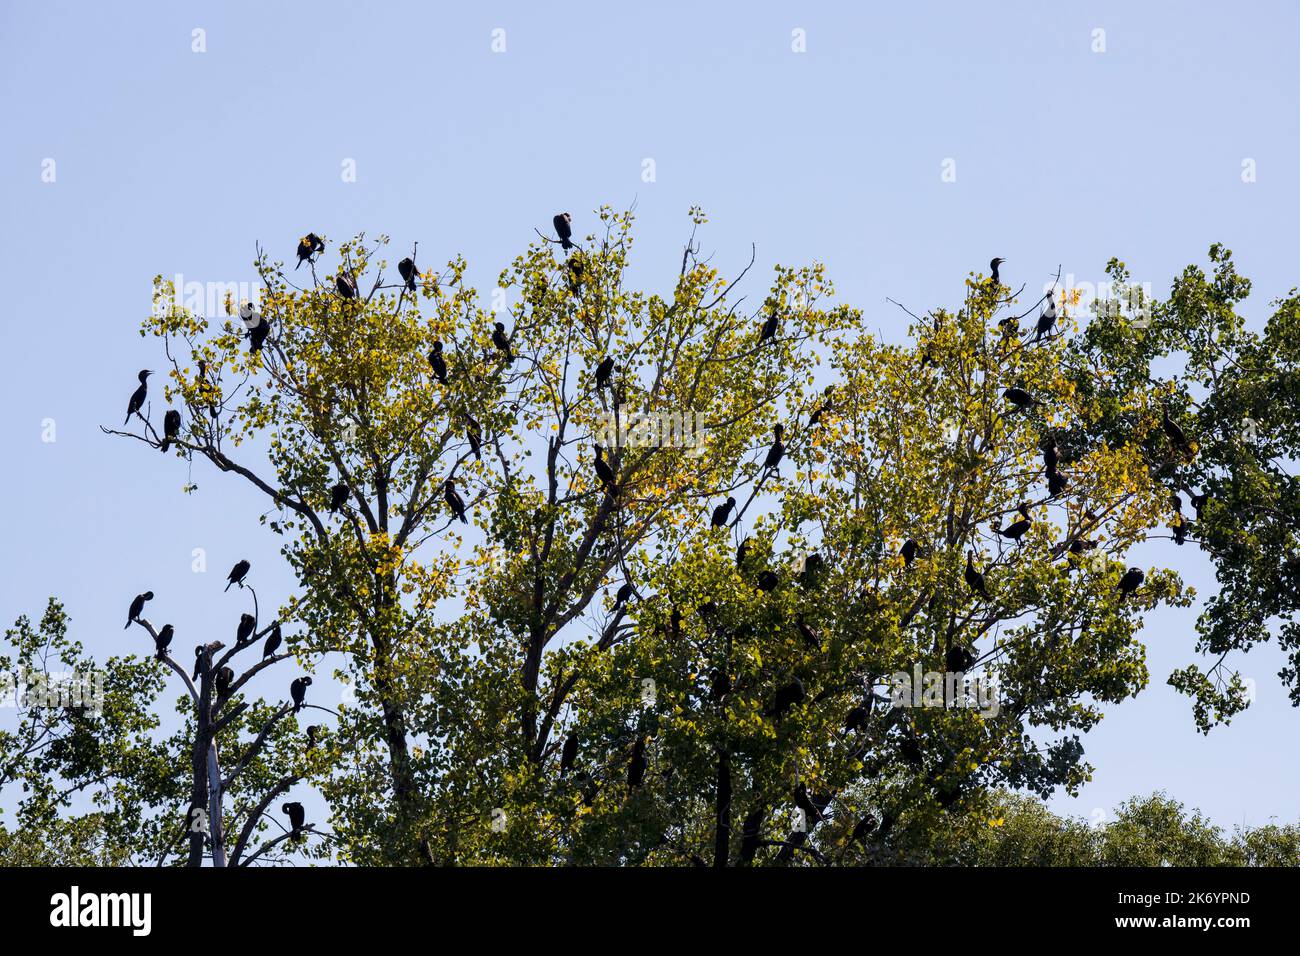 Cormorants roosting on trees on the Upper Mississippi River. Roosting cormorants damage trees.  Eventually the trees die. Double-crested cormorants ha Stock Photo